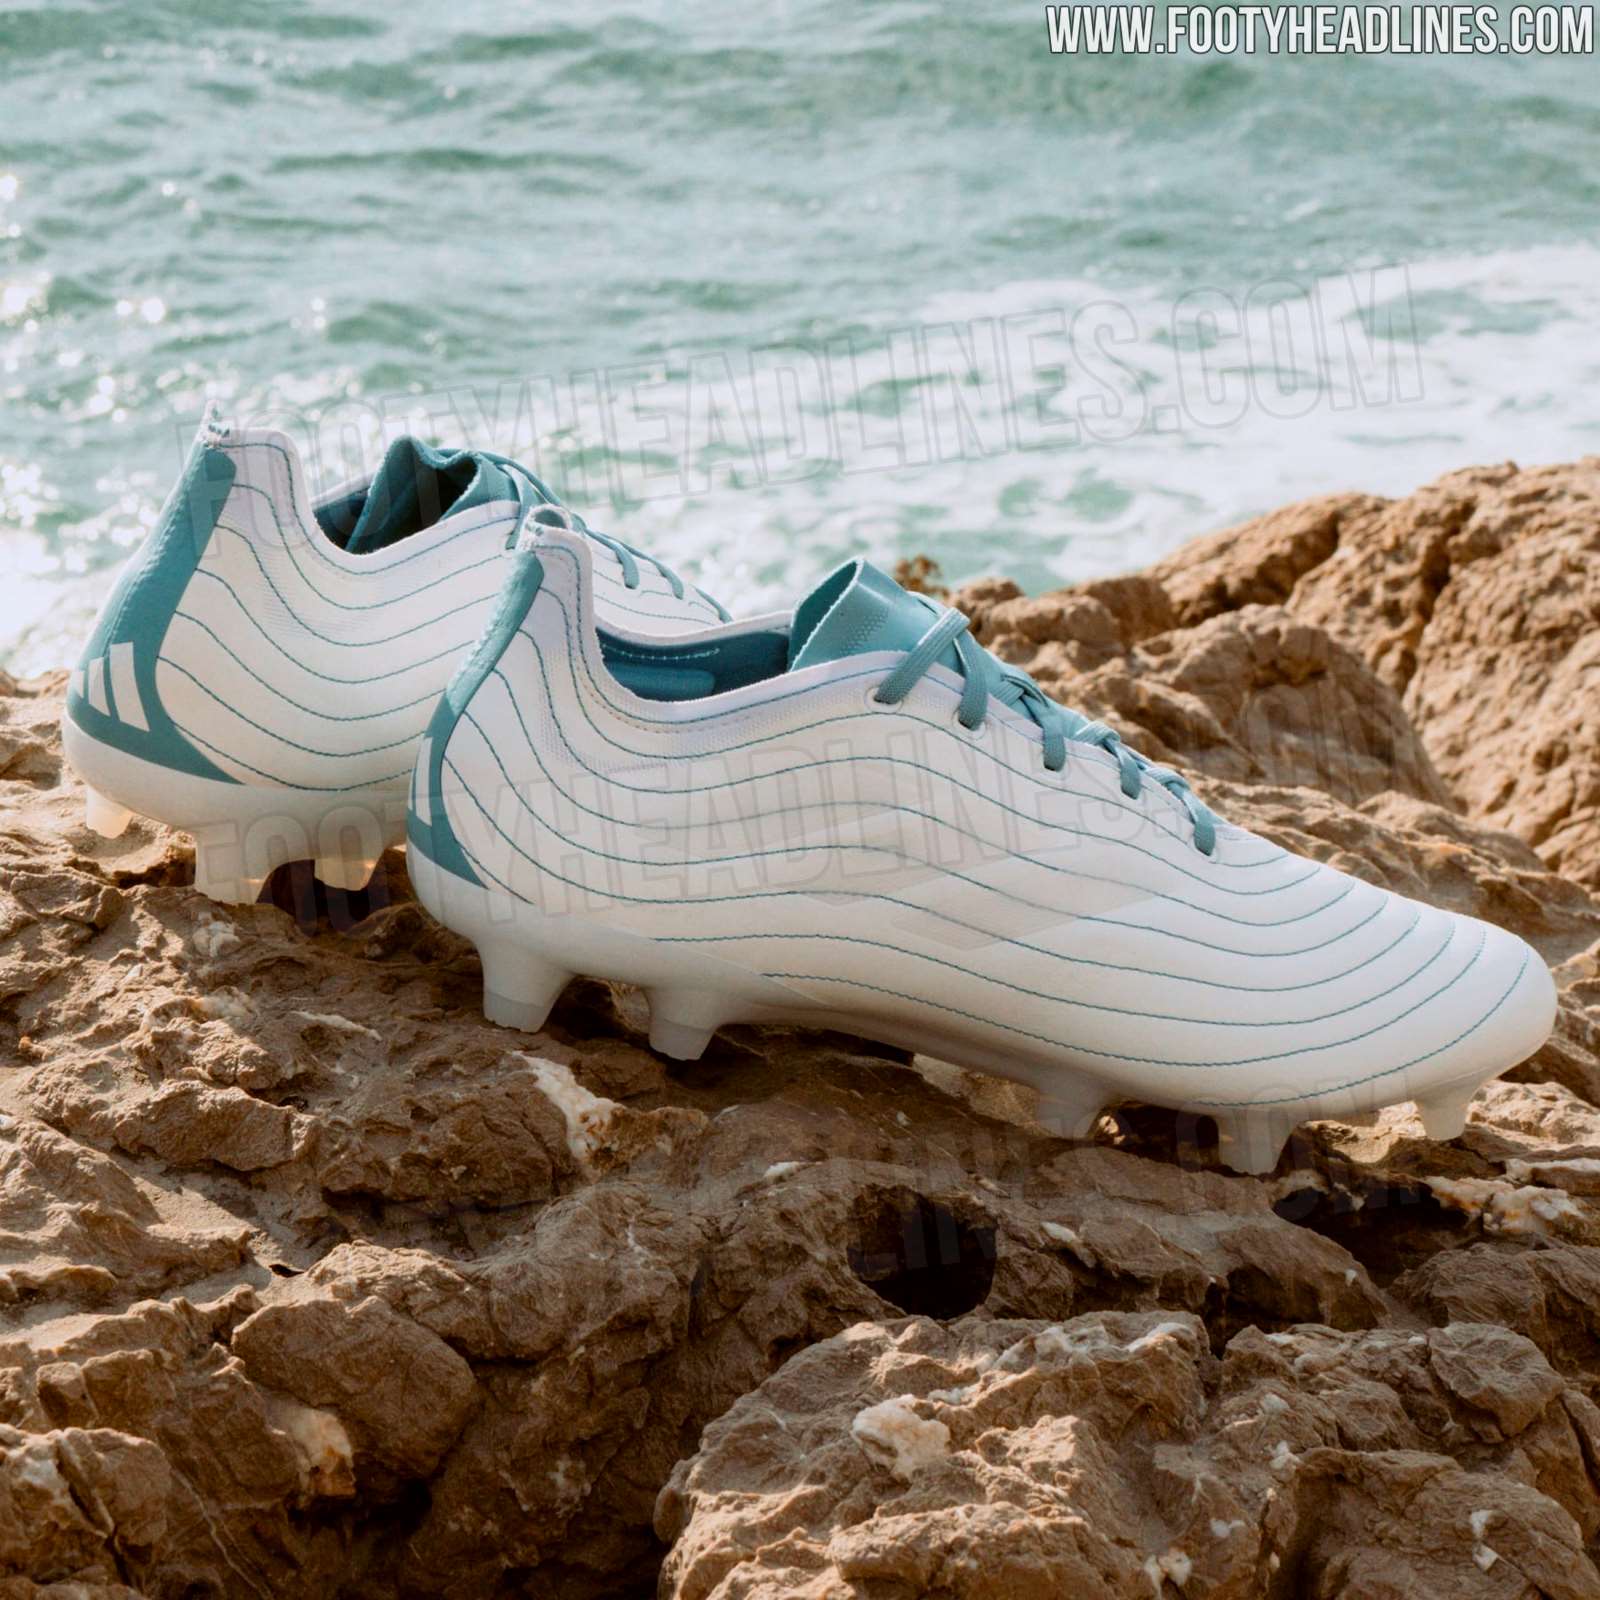 No Leather? Special-Edition Adidas x Parley Copa Pure "Sustainability Pack" Leaked - Headlines